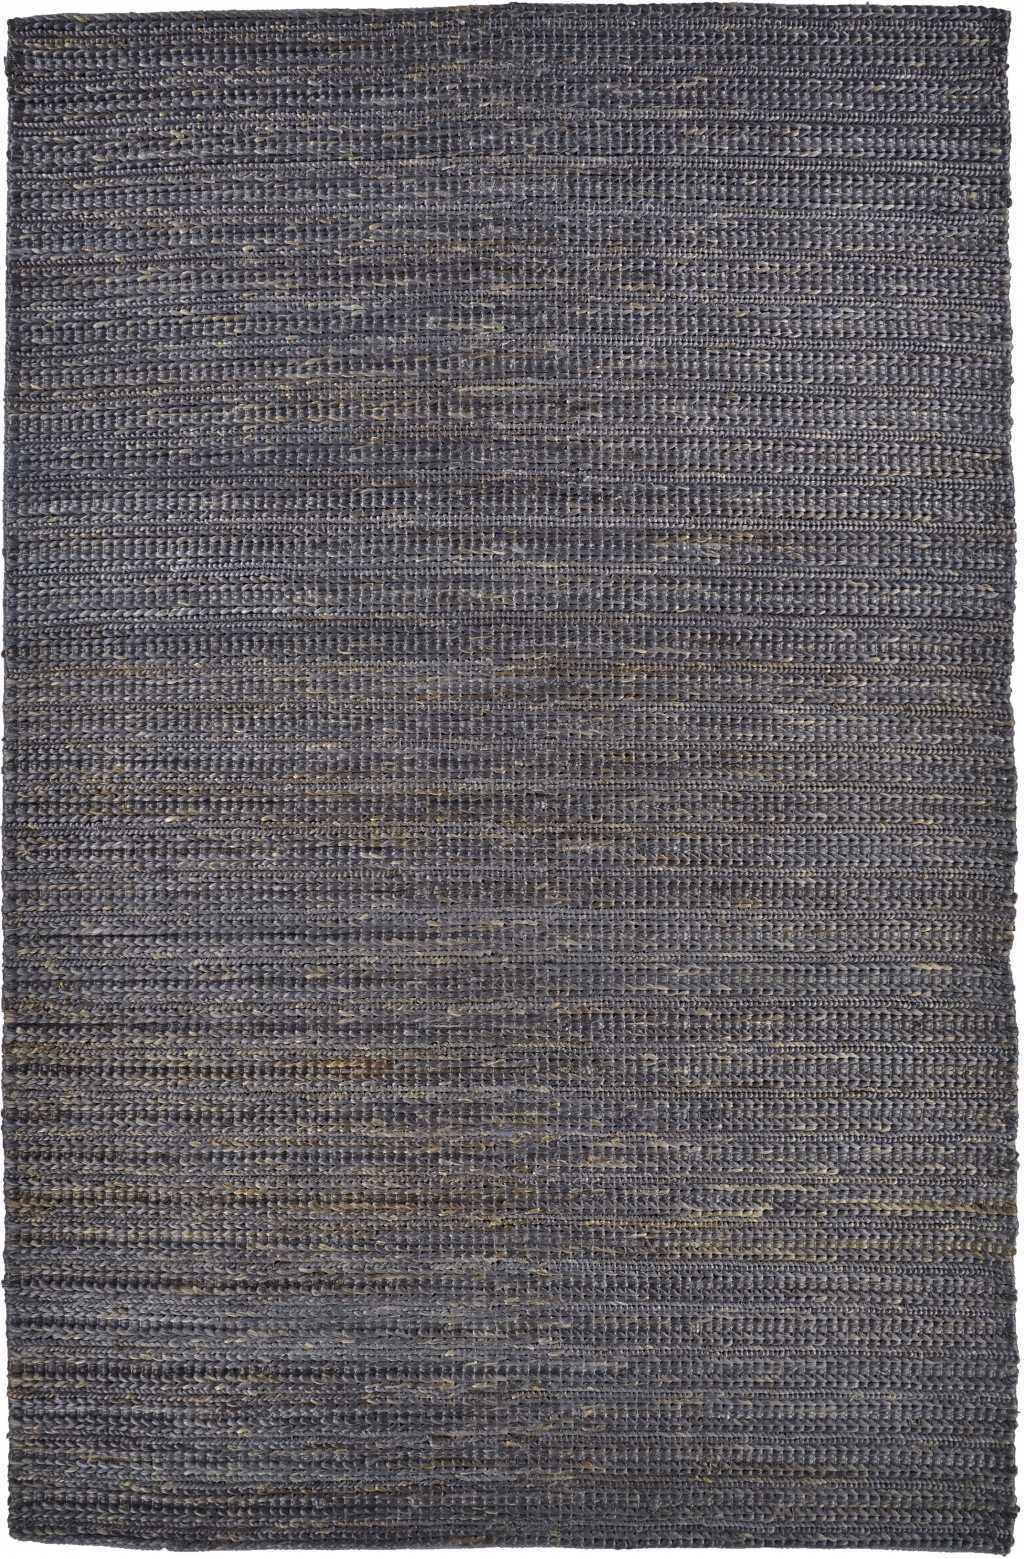 4' X 6' Brown Blue And Taupe Hand Woven Area Rug-511425-1